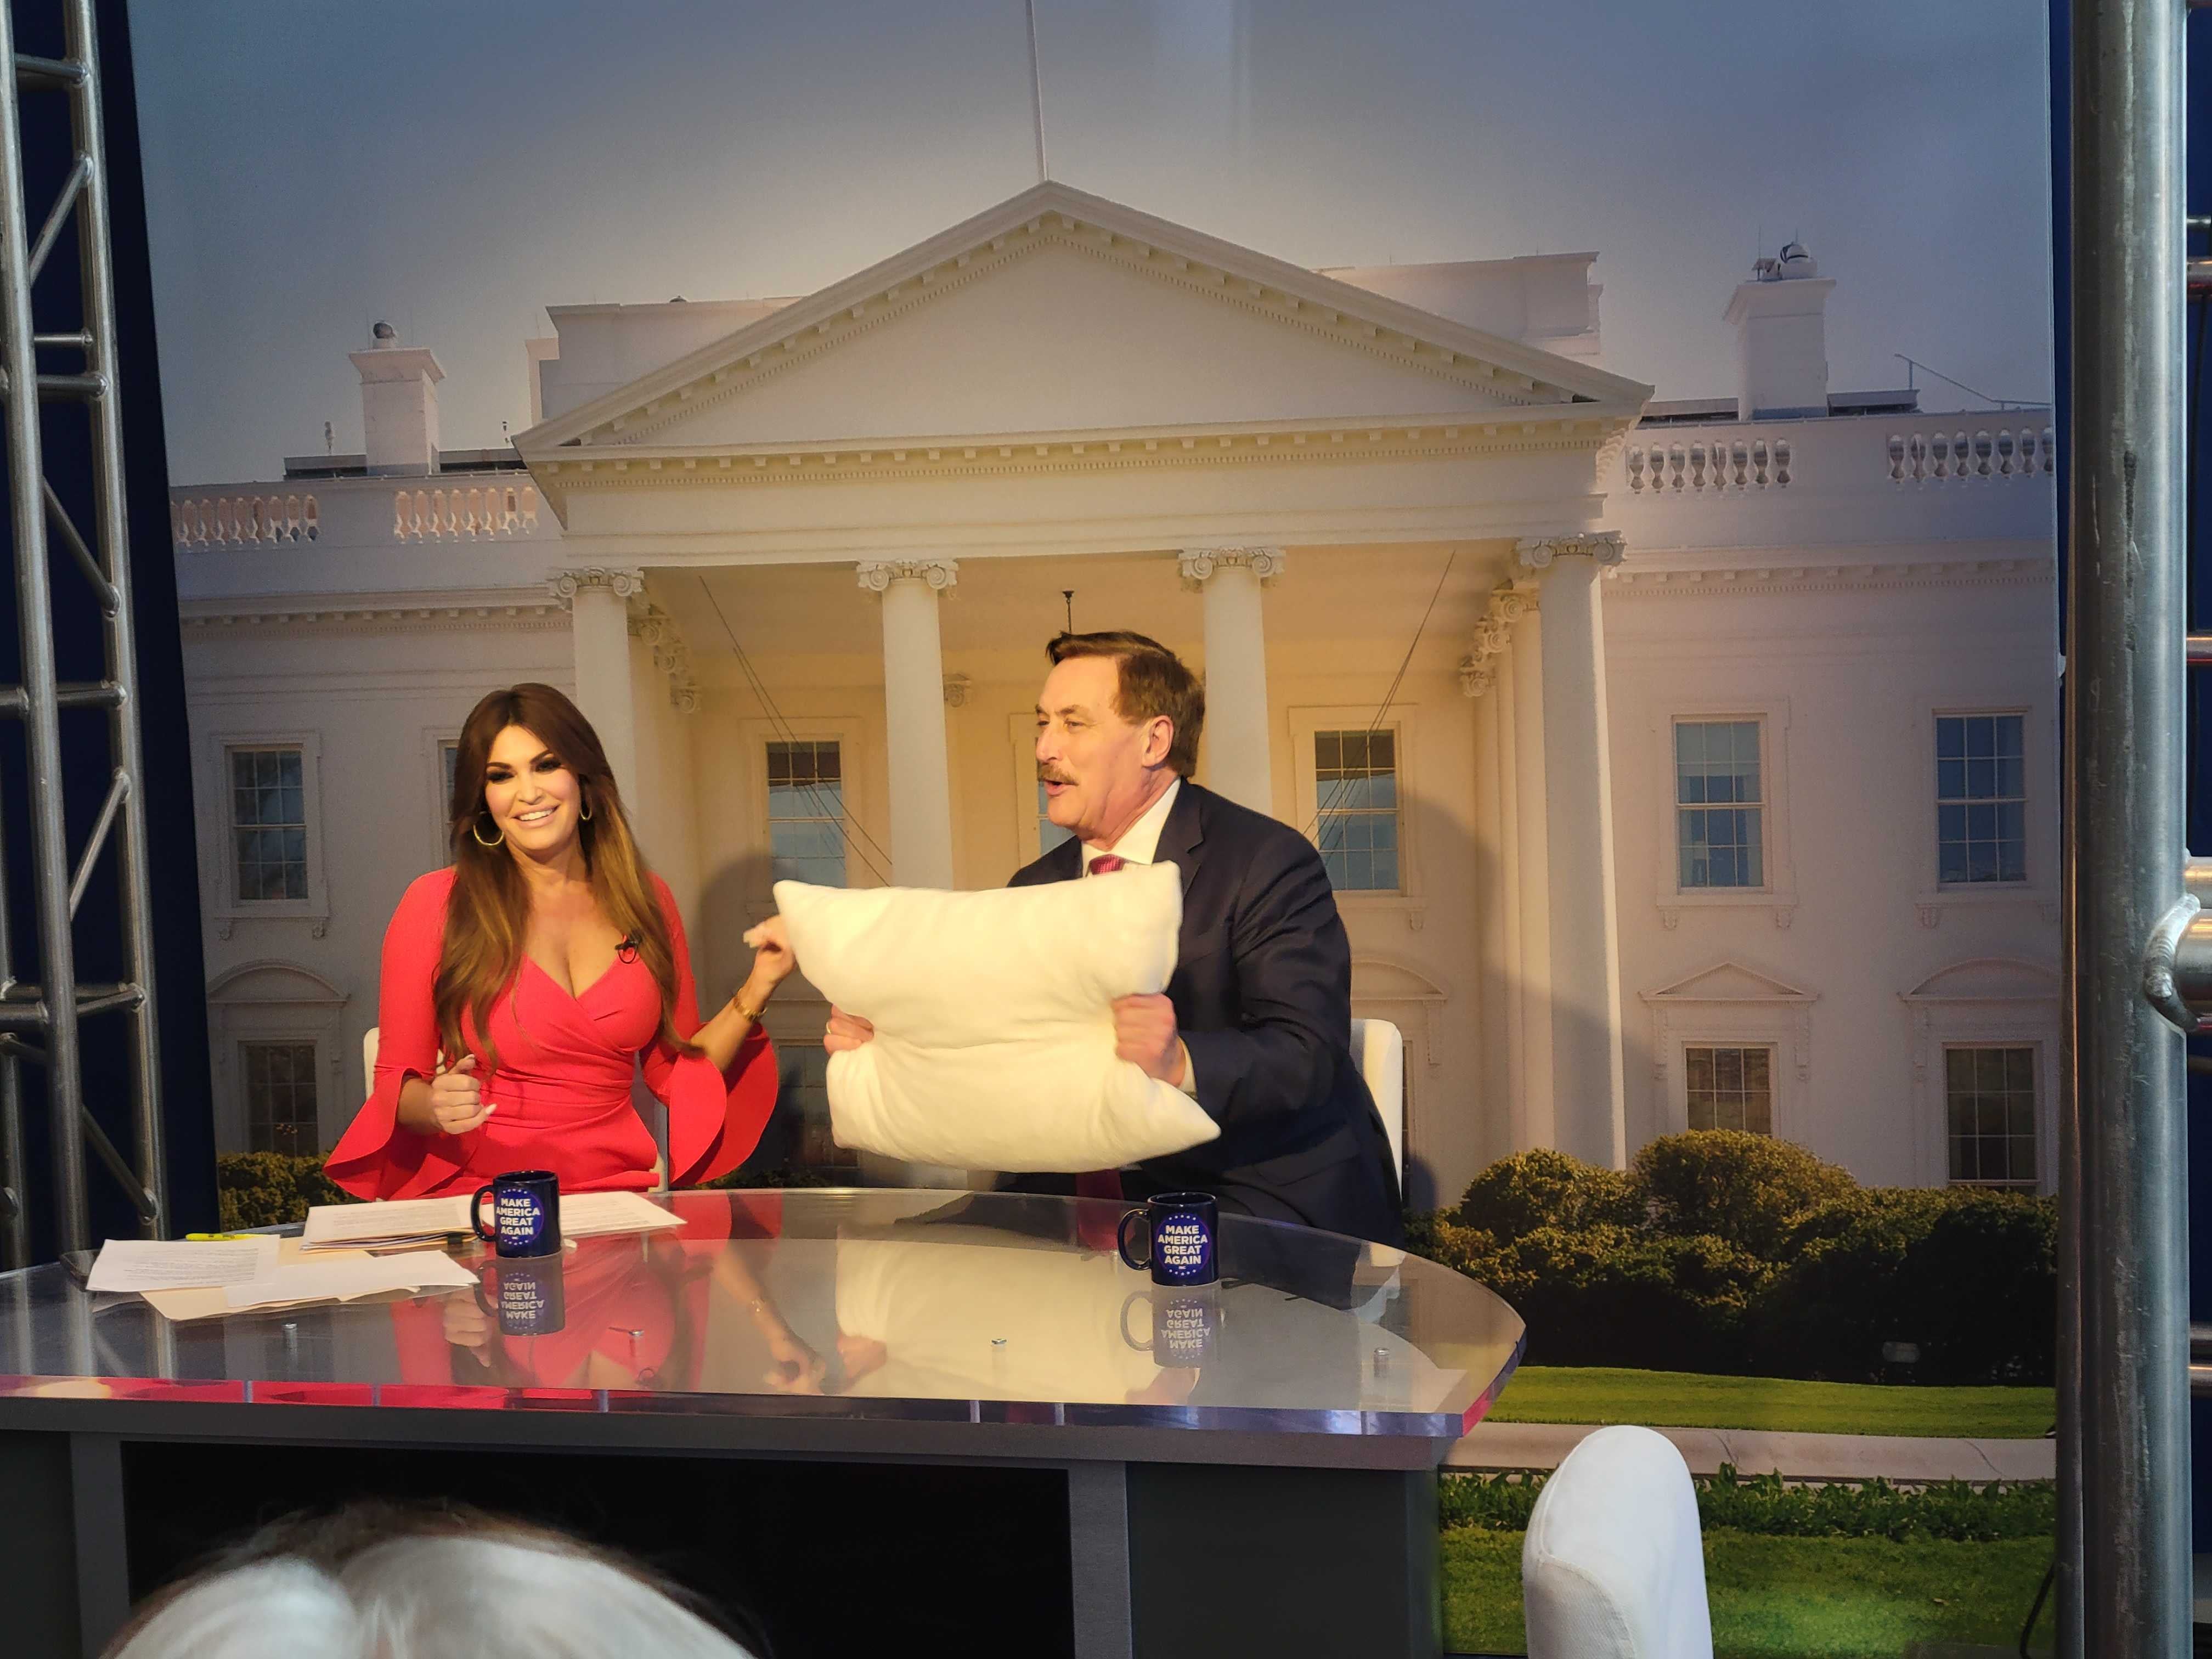 MyPillow CEO Mike Lindell holds up one of his products during an interview with Kimberly Guilfoyle at CPAC 2023